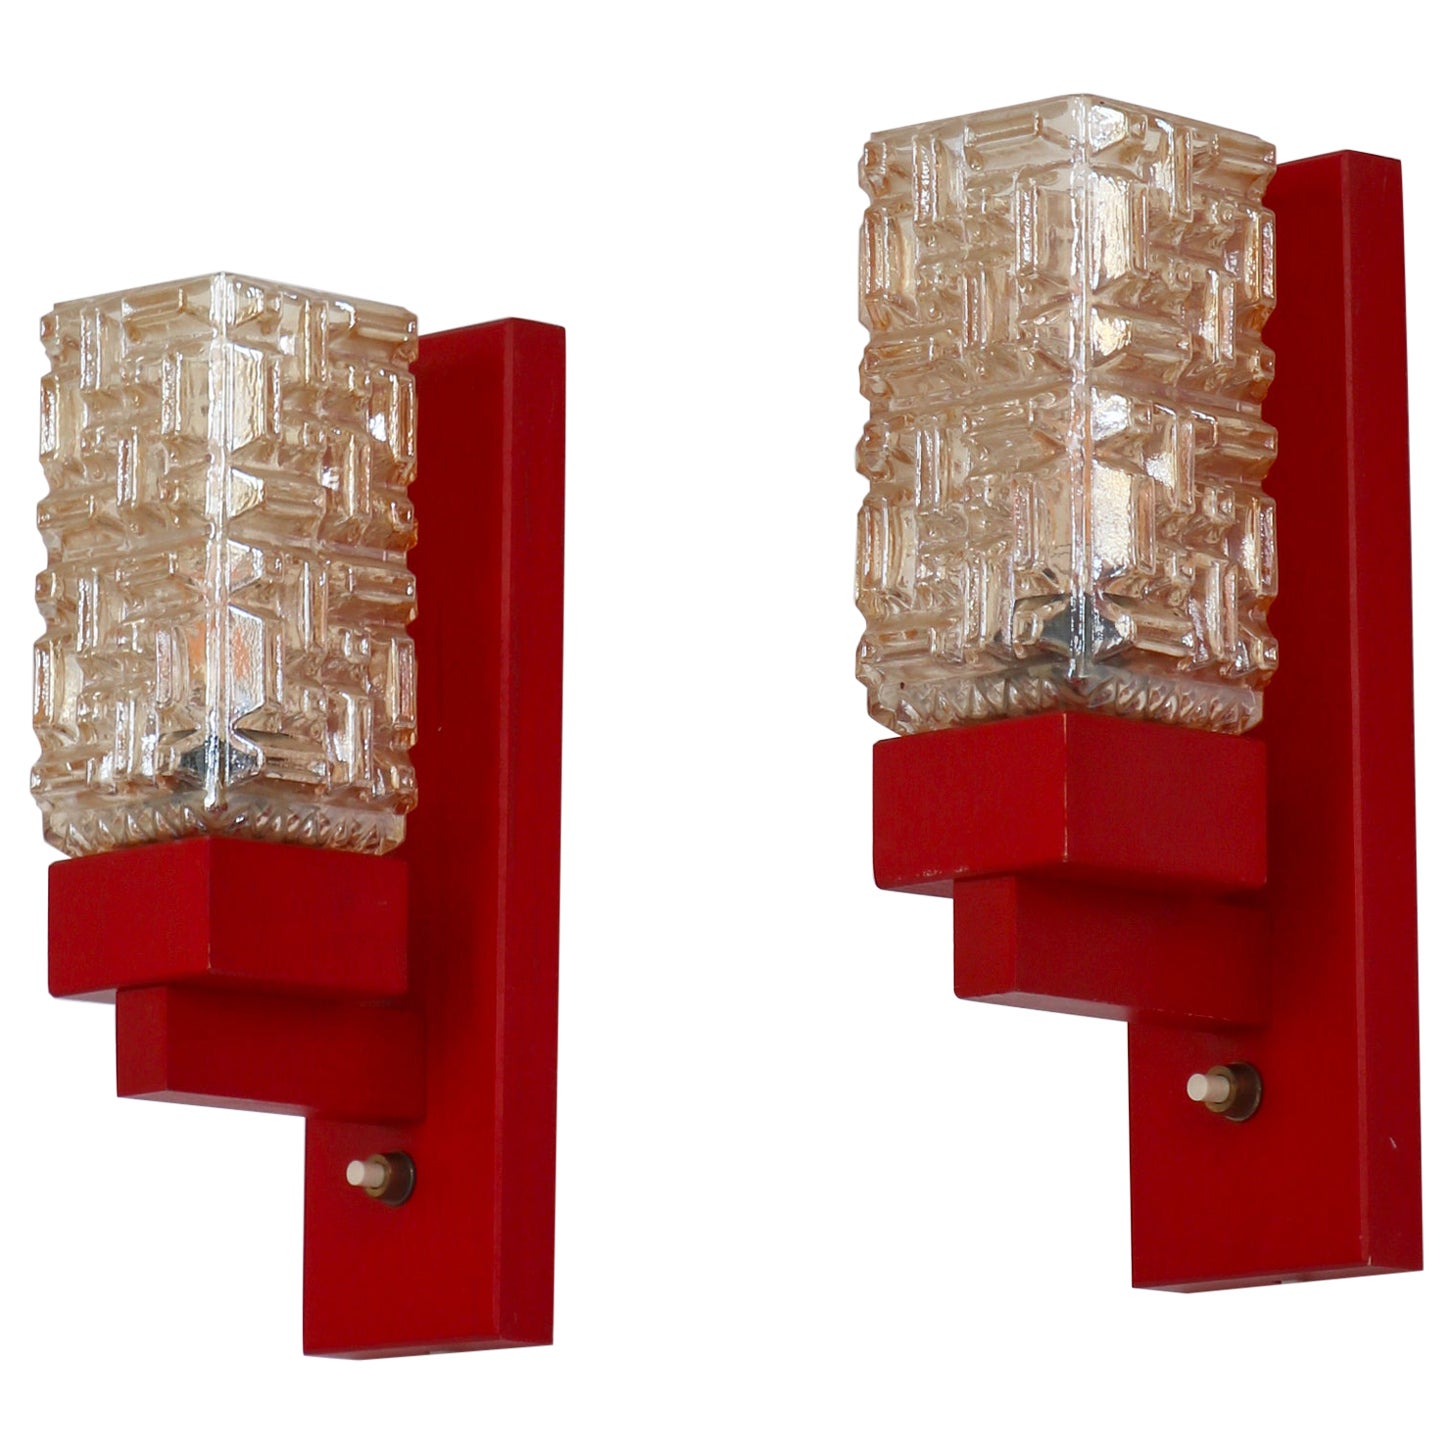 Set of "Vitrika" Wall Lamps in Red Lacquered Wood & Amber Glass, Denmark, 1970s For Sale